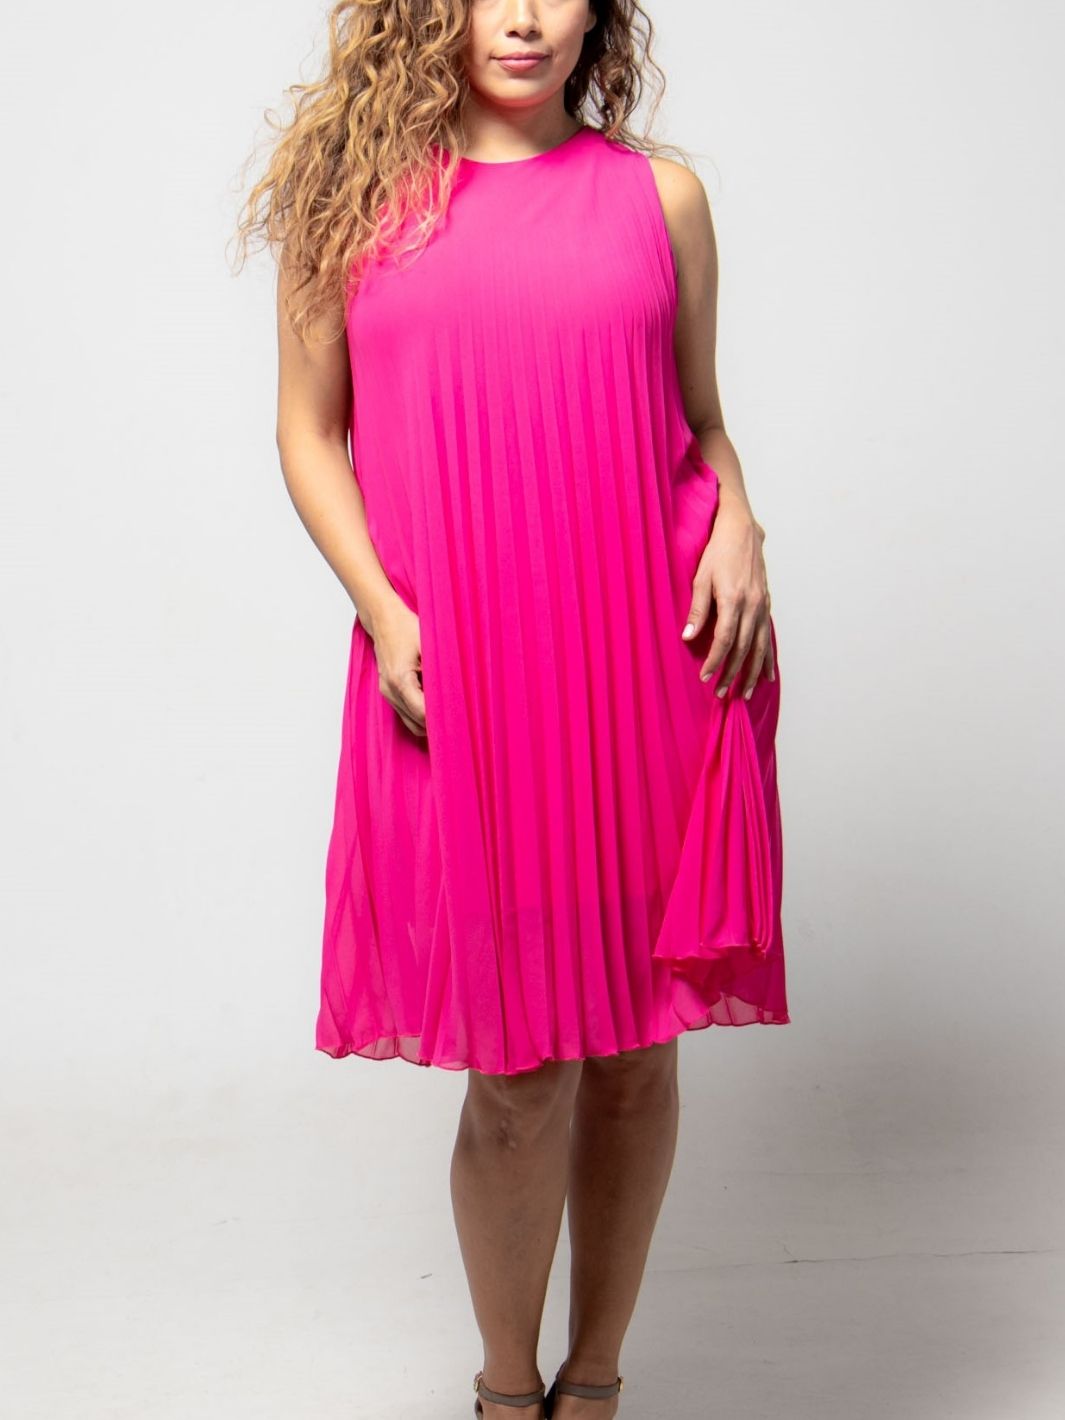 Pleated Mid Length Dress - Coral